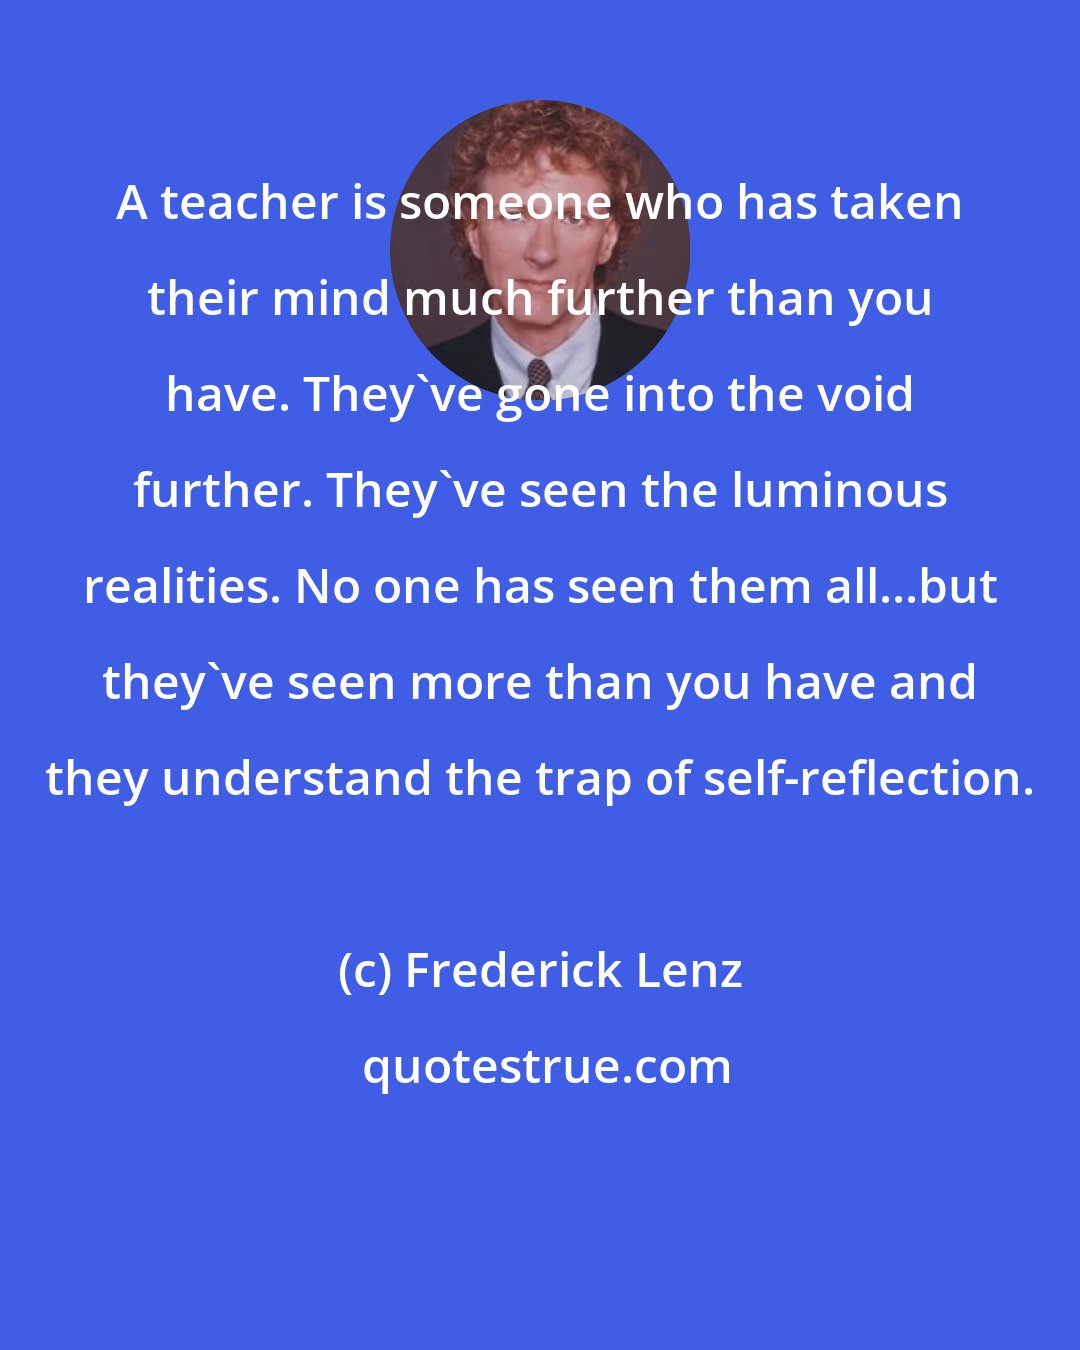 Frederick Lenz: A teacher is someone who has taken their mind much further than you have. They've gone into the void further. They've seen the luminous realities. No one has seen them all...but they've seen more than you have and they understand the trap of self-reflection.